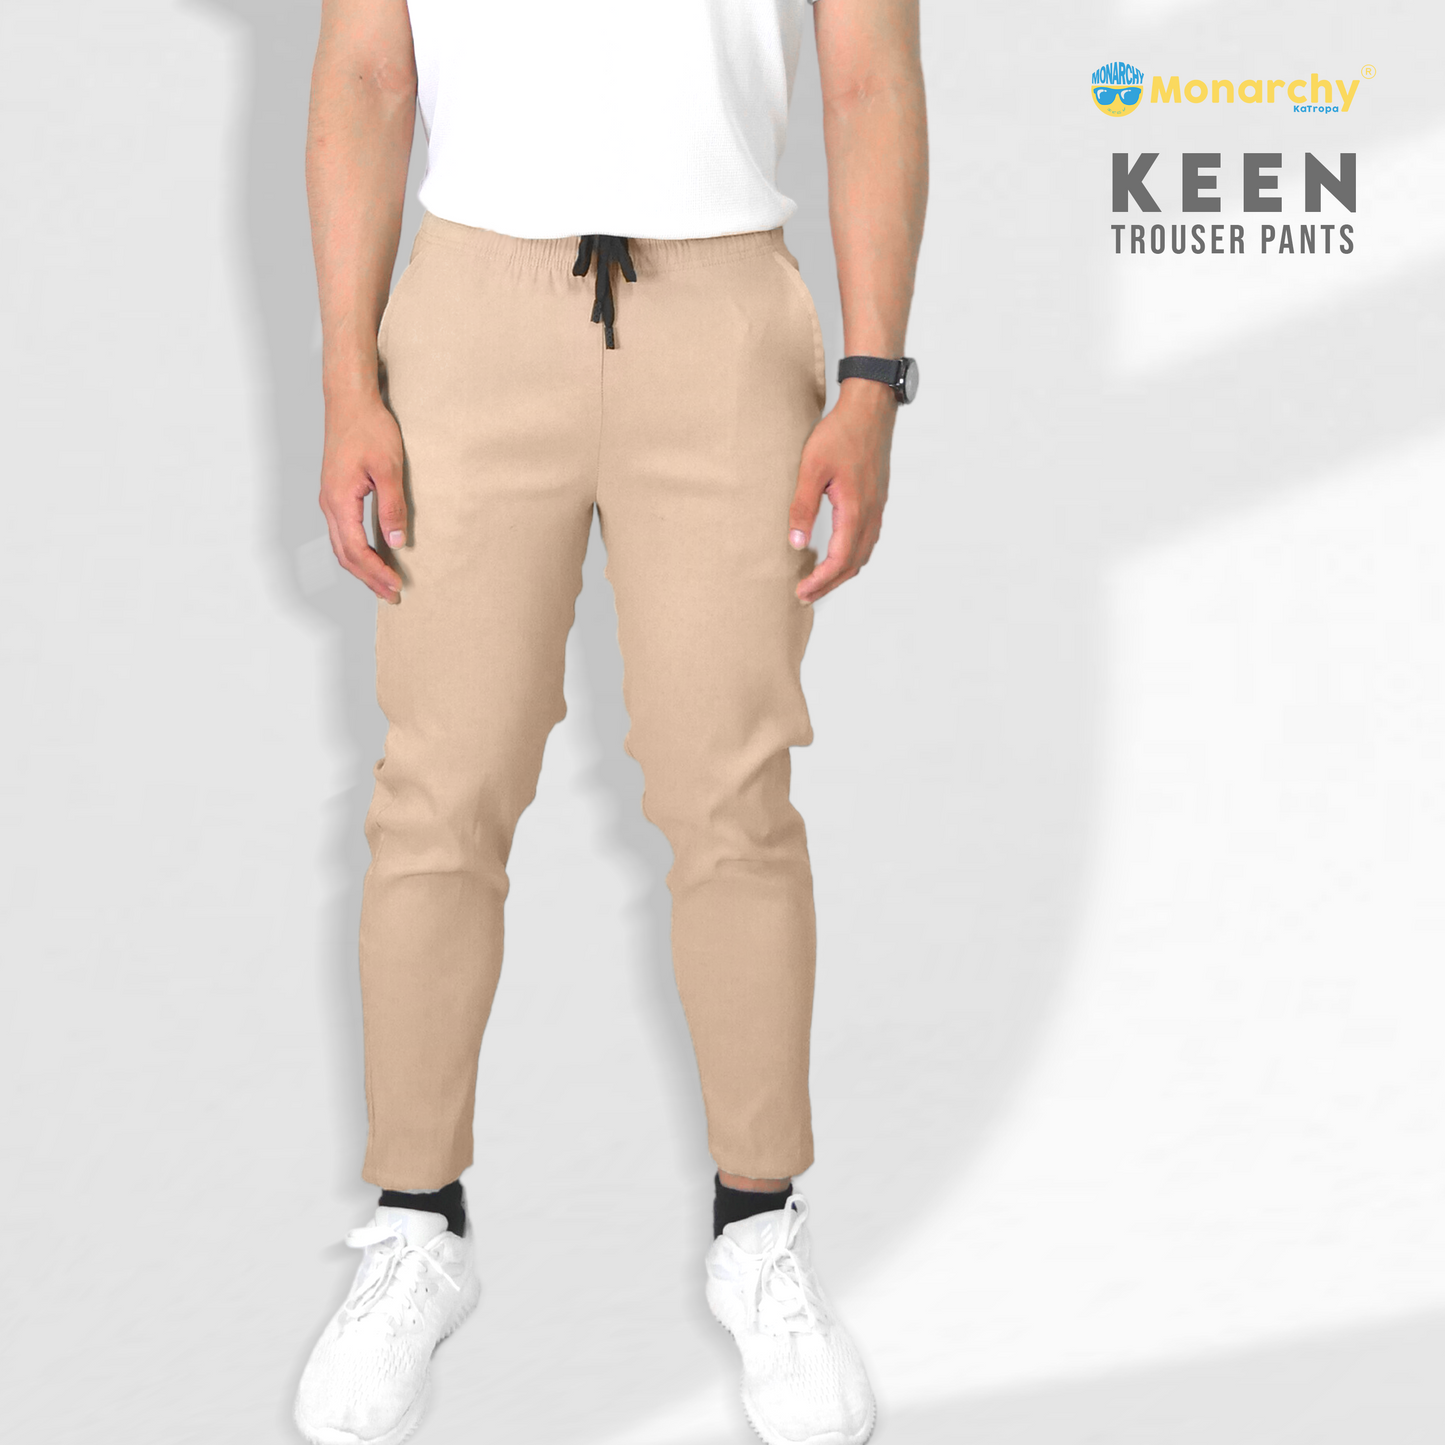 Monarchy Official KEEN Trouser Pants I High Quality Fashion Men’s Stretchable Straight Cut Trouser Pants